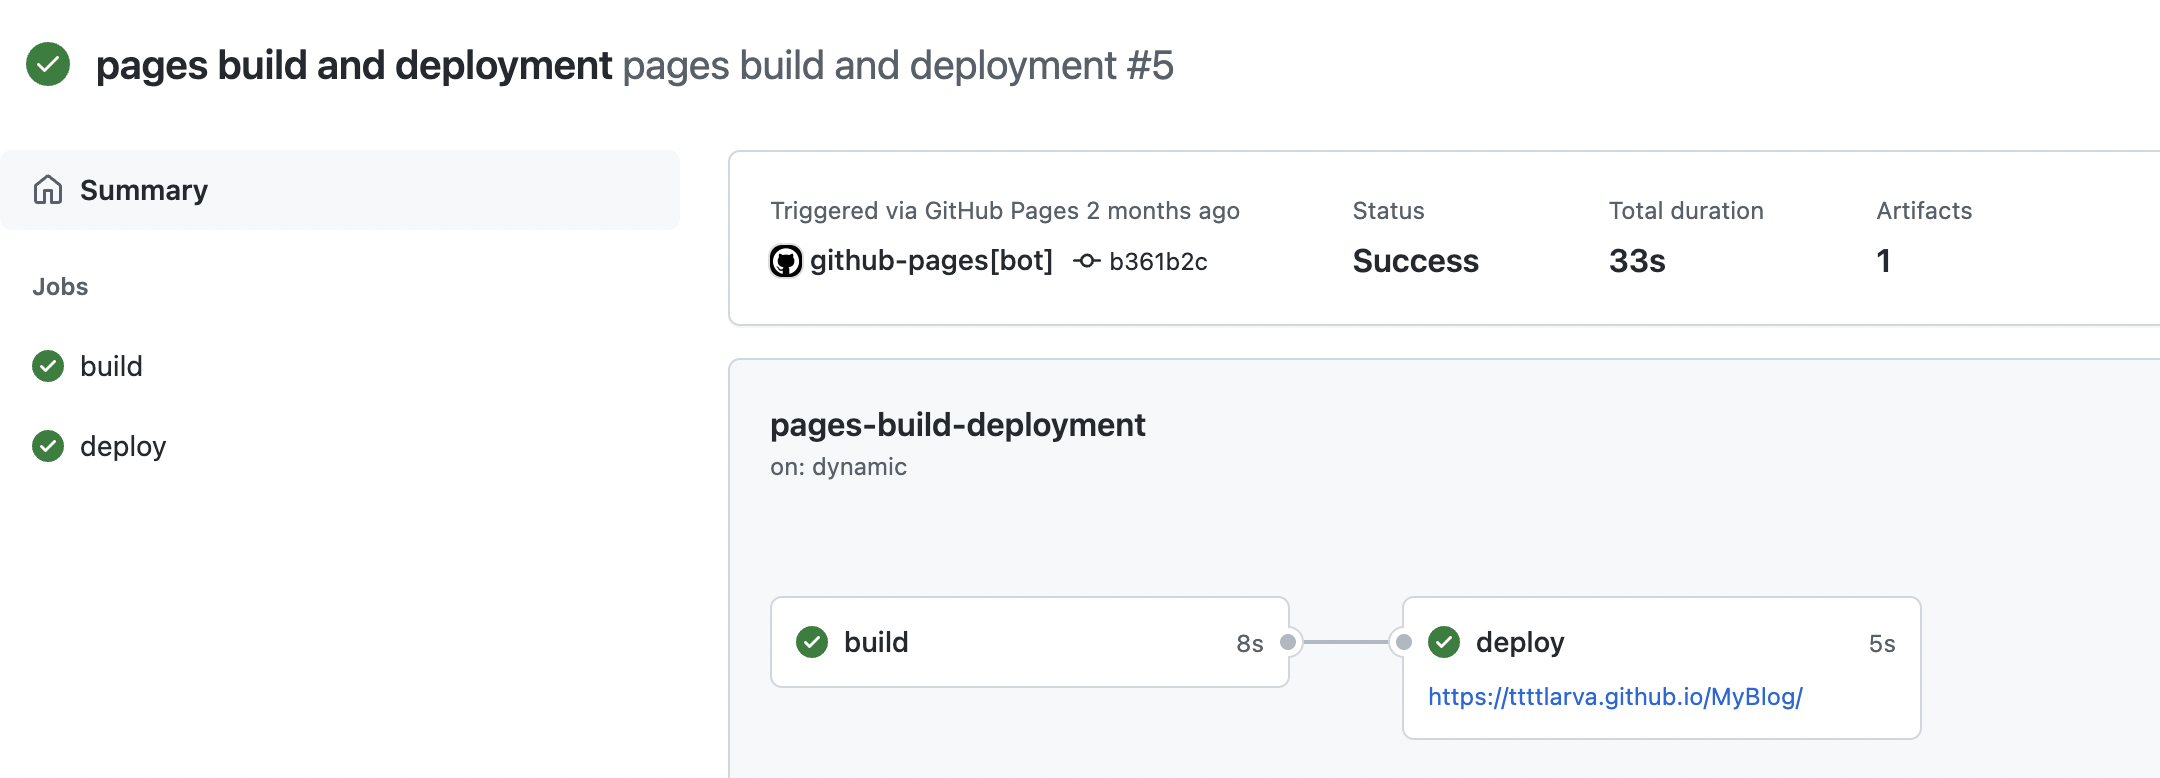 pages build and deployment